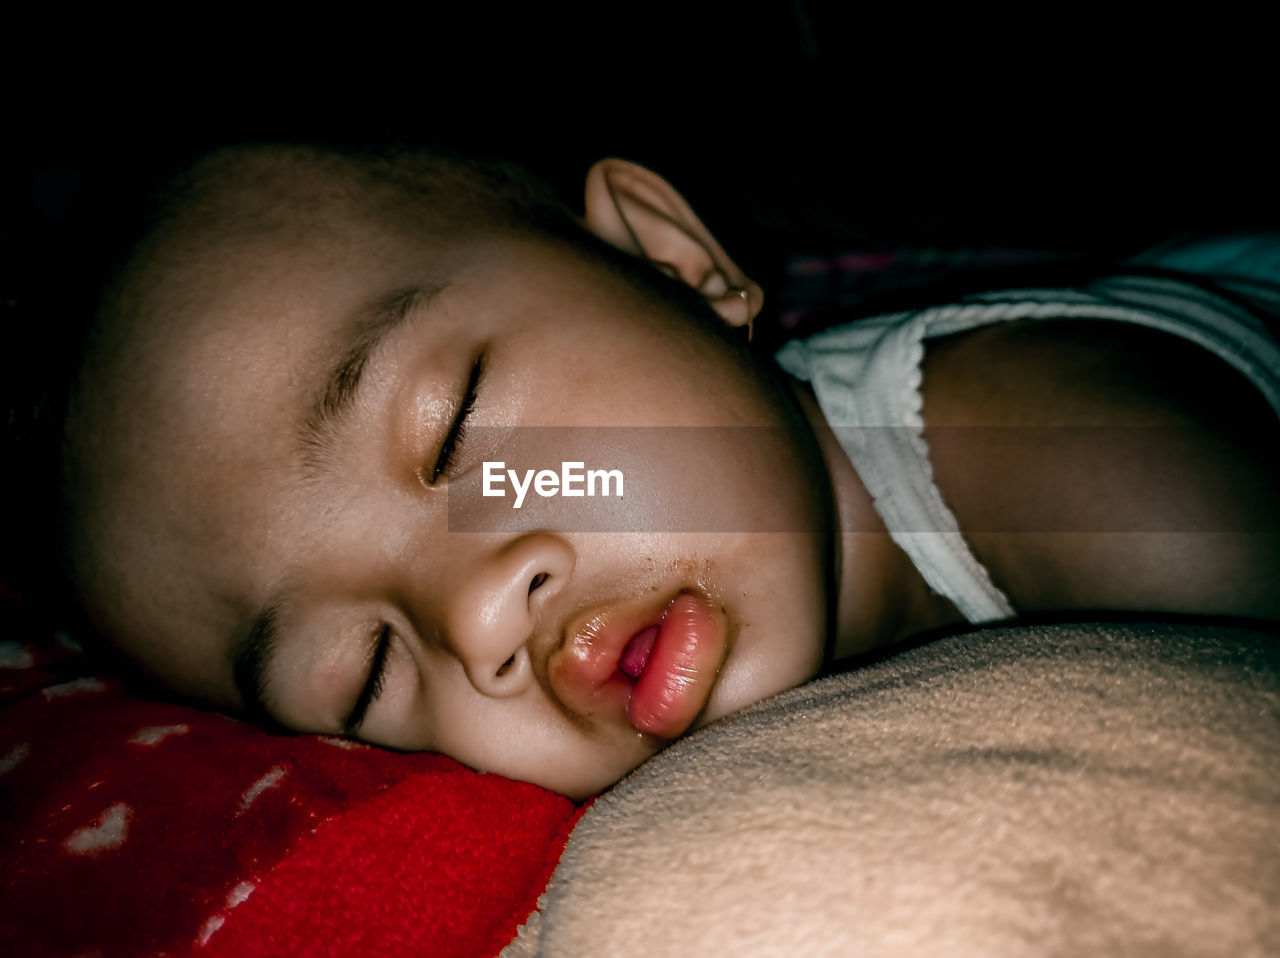 CLOSE-UP PORTRAIT OF BABY SLEEPING ON BED